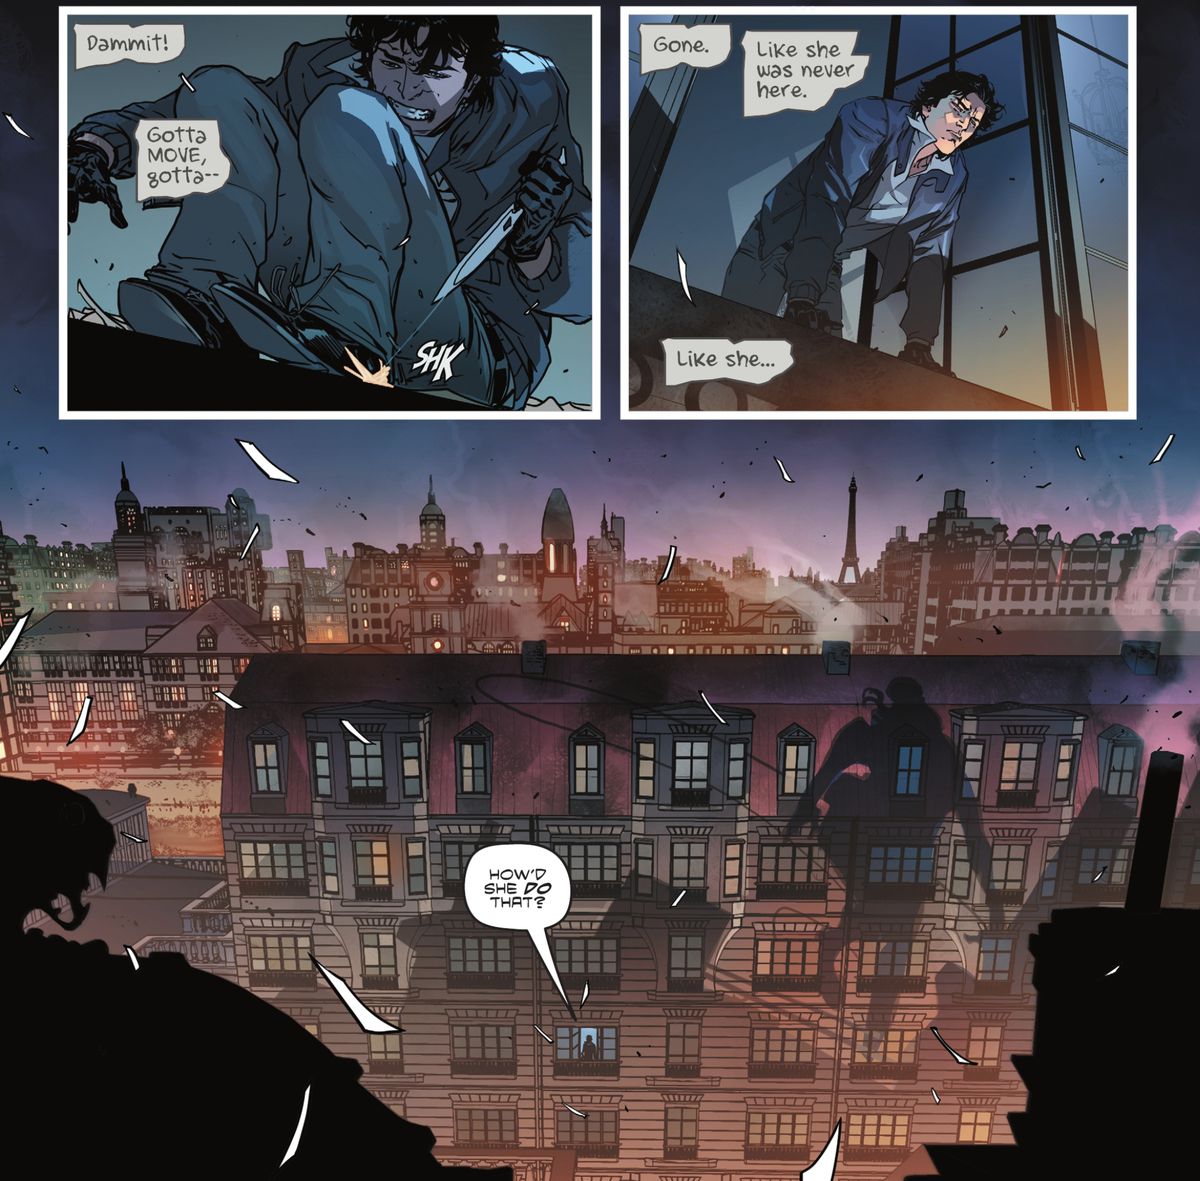 A young Bruce Wayne dashes to a window in pursuit only to find his quarry has disappeared after leaping from it. “How did she do that?” he says aloud, in a panel that forms a large wide shot of the exterior of the building he’s in. The reader can see the shadow of the fleeing woman huge on the building’s facade in Batman: The Knight #2 (2022).